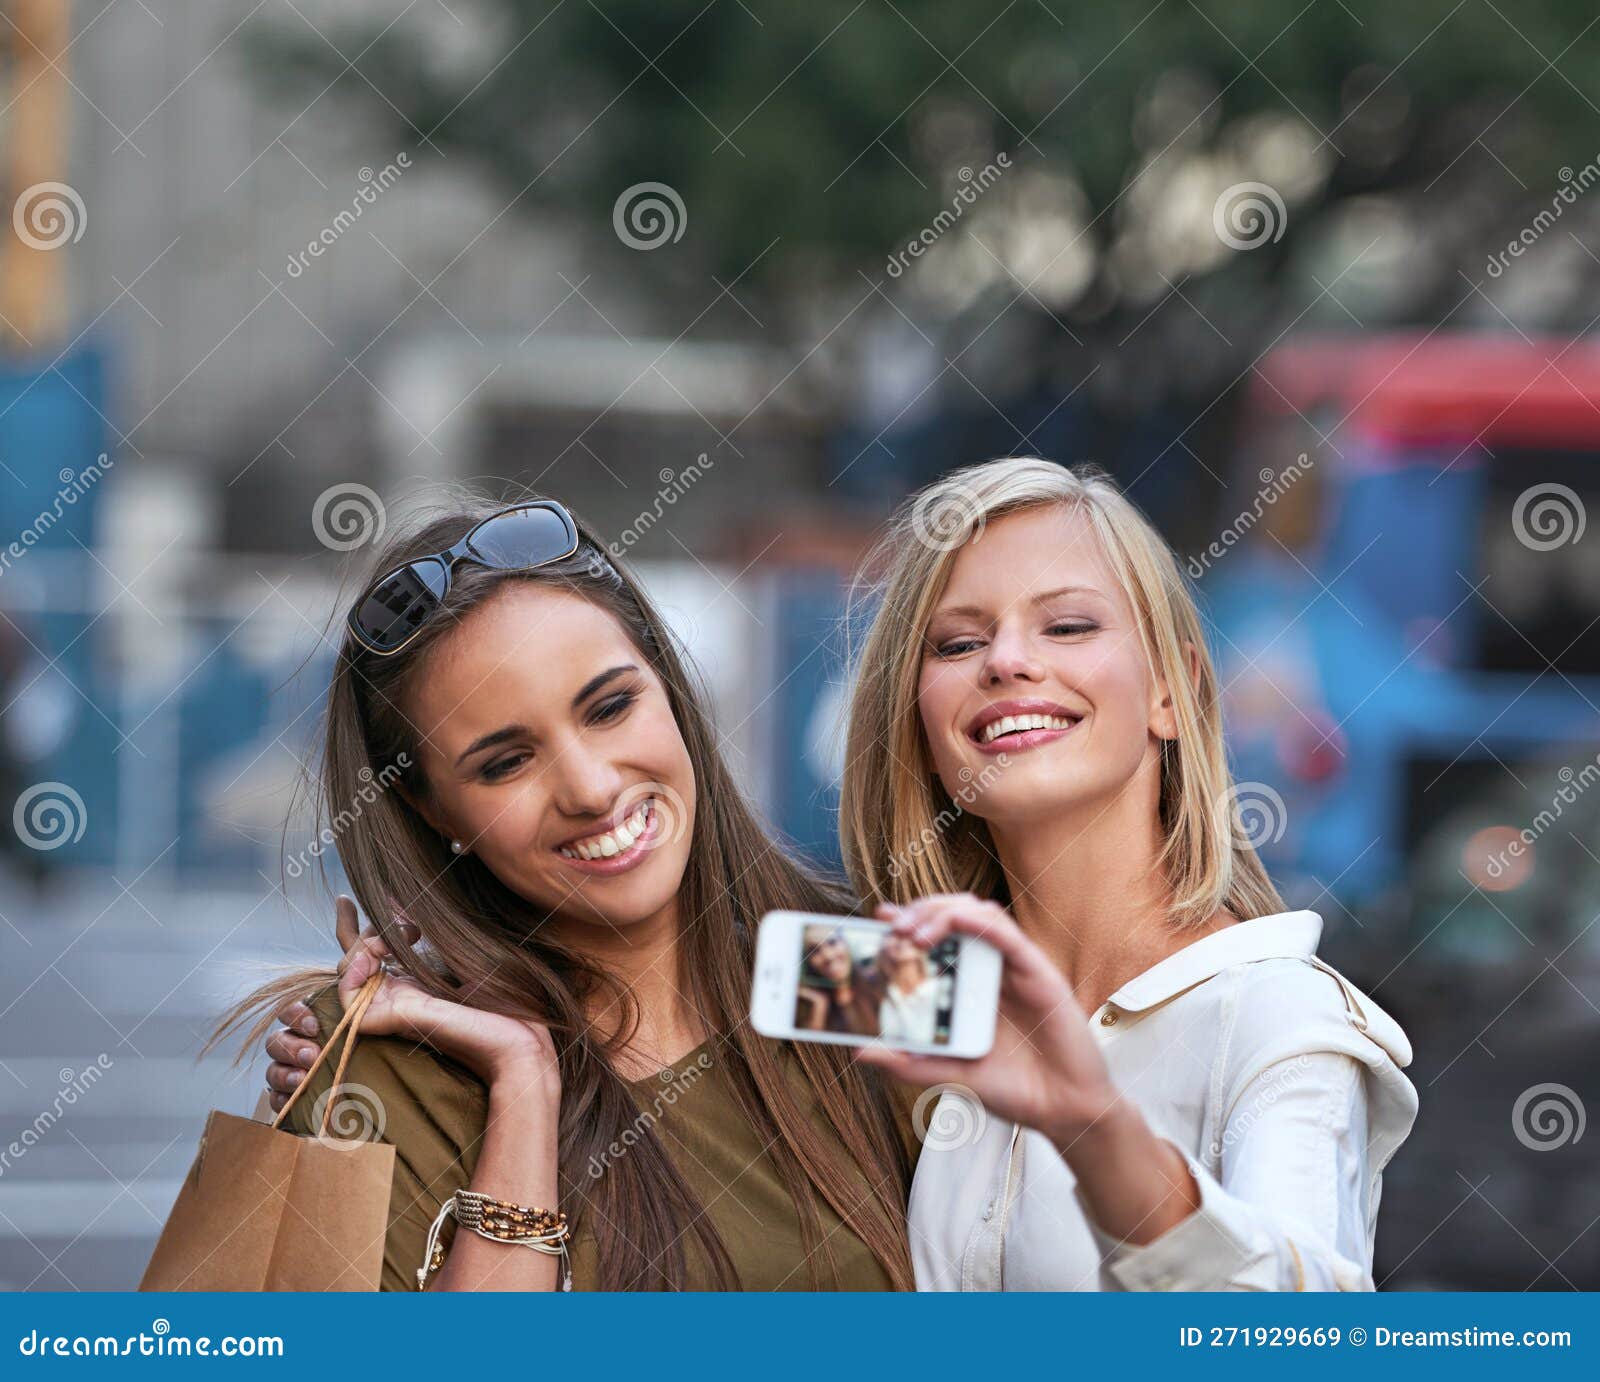 Friendship Never Goes Out of Style. Two Young Women Taking a Selfie ...